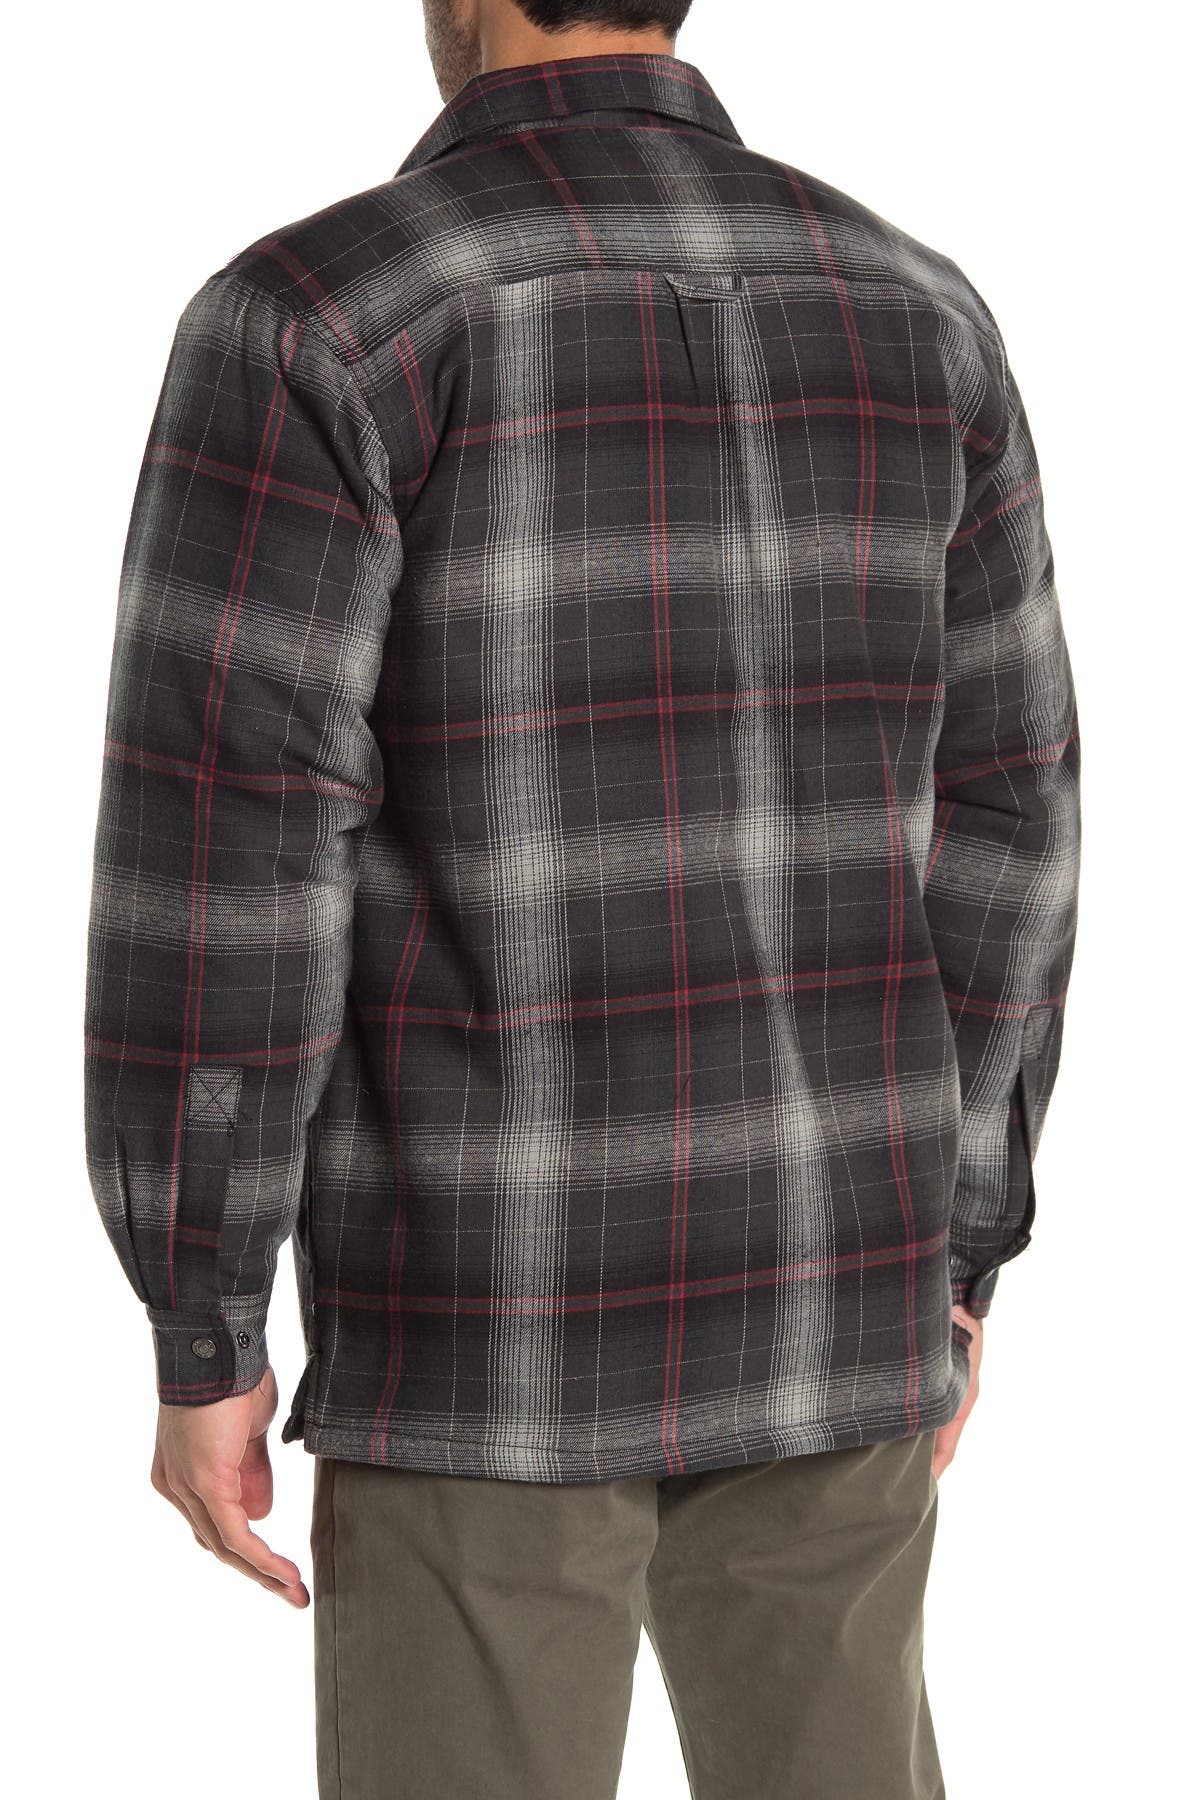 Wolverine | Marshall Plaid Flannel Zip Faux Shearling Lined Shirt ...